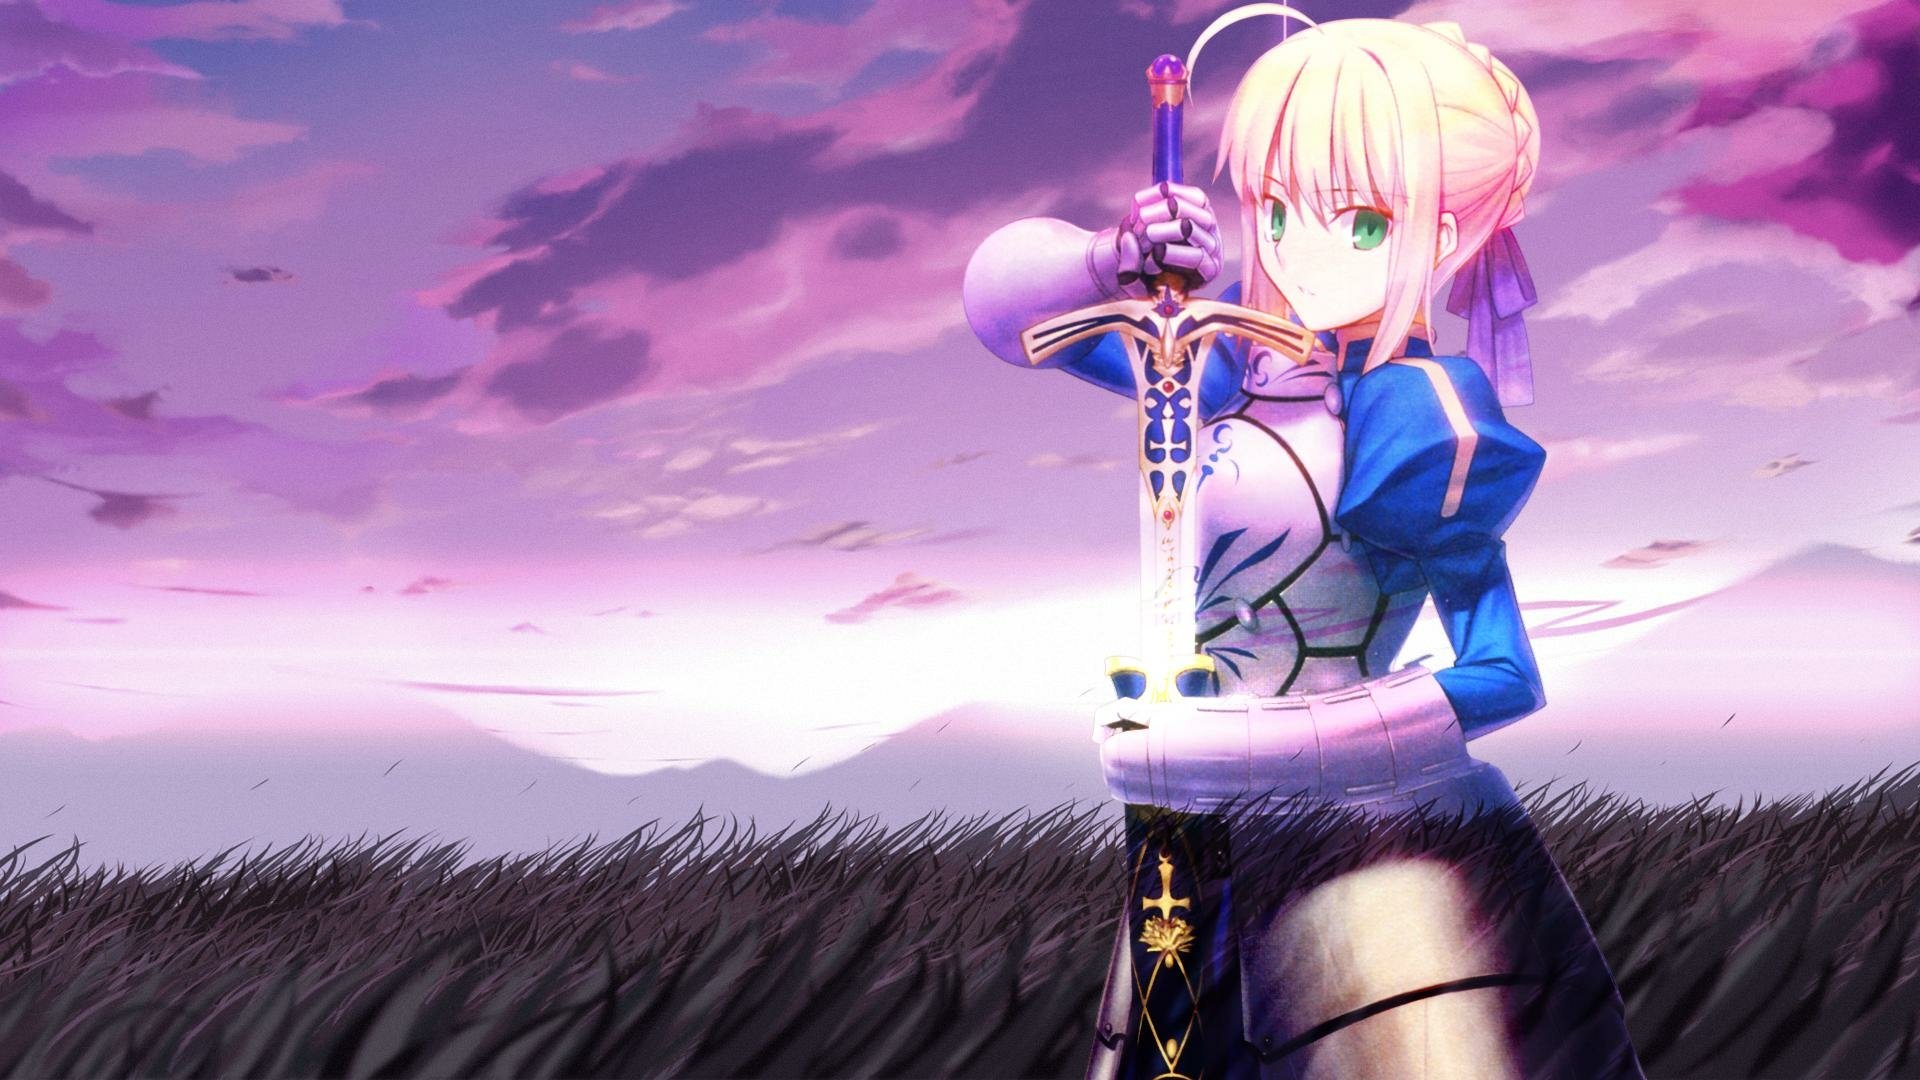 Fate/Stay Night HD Wallpaper Background Image 1920x1080.